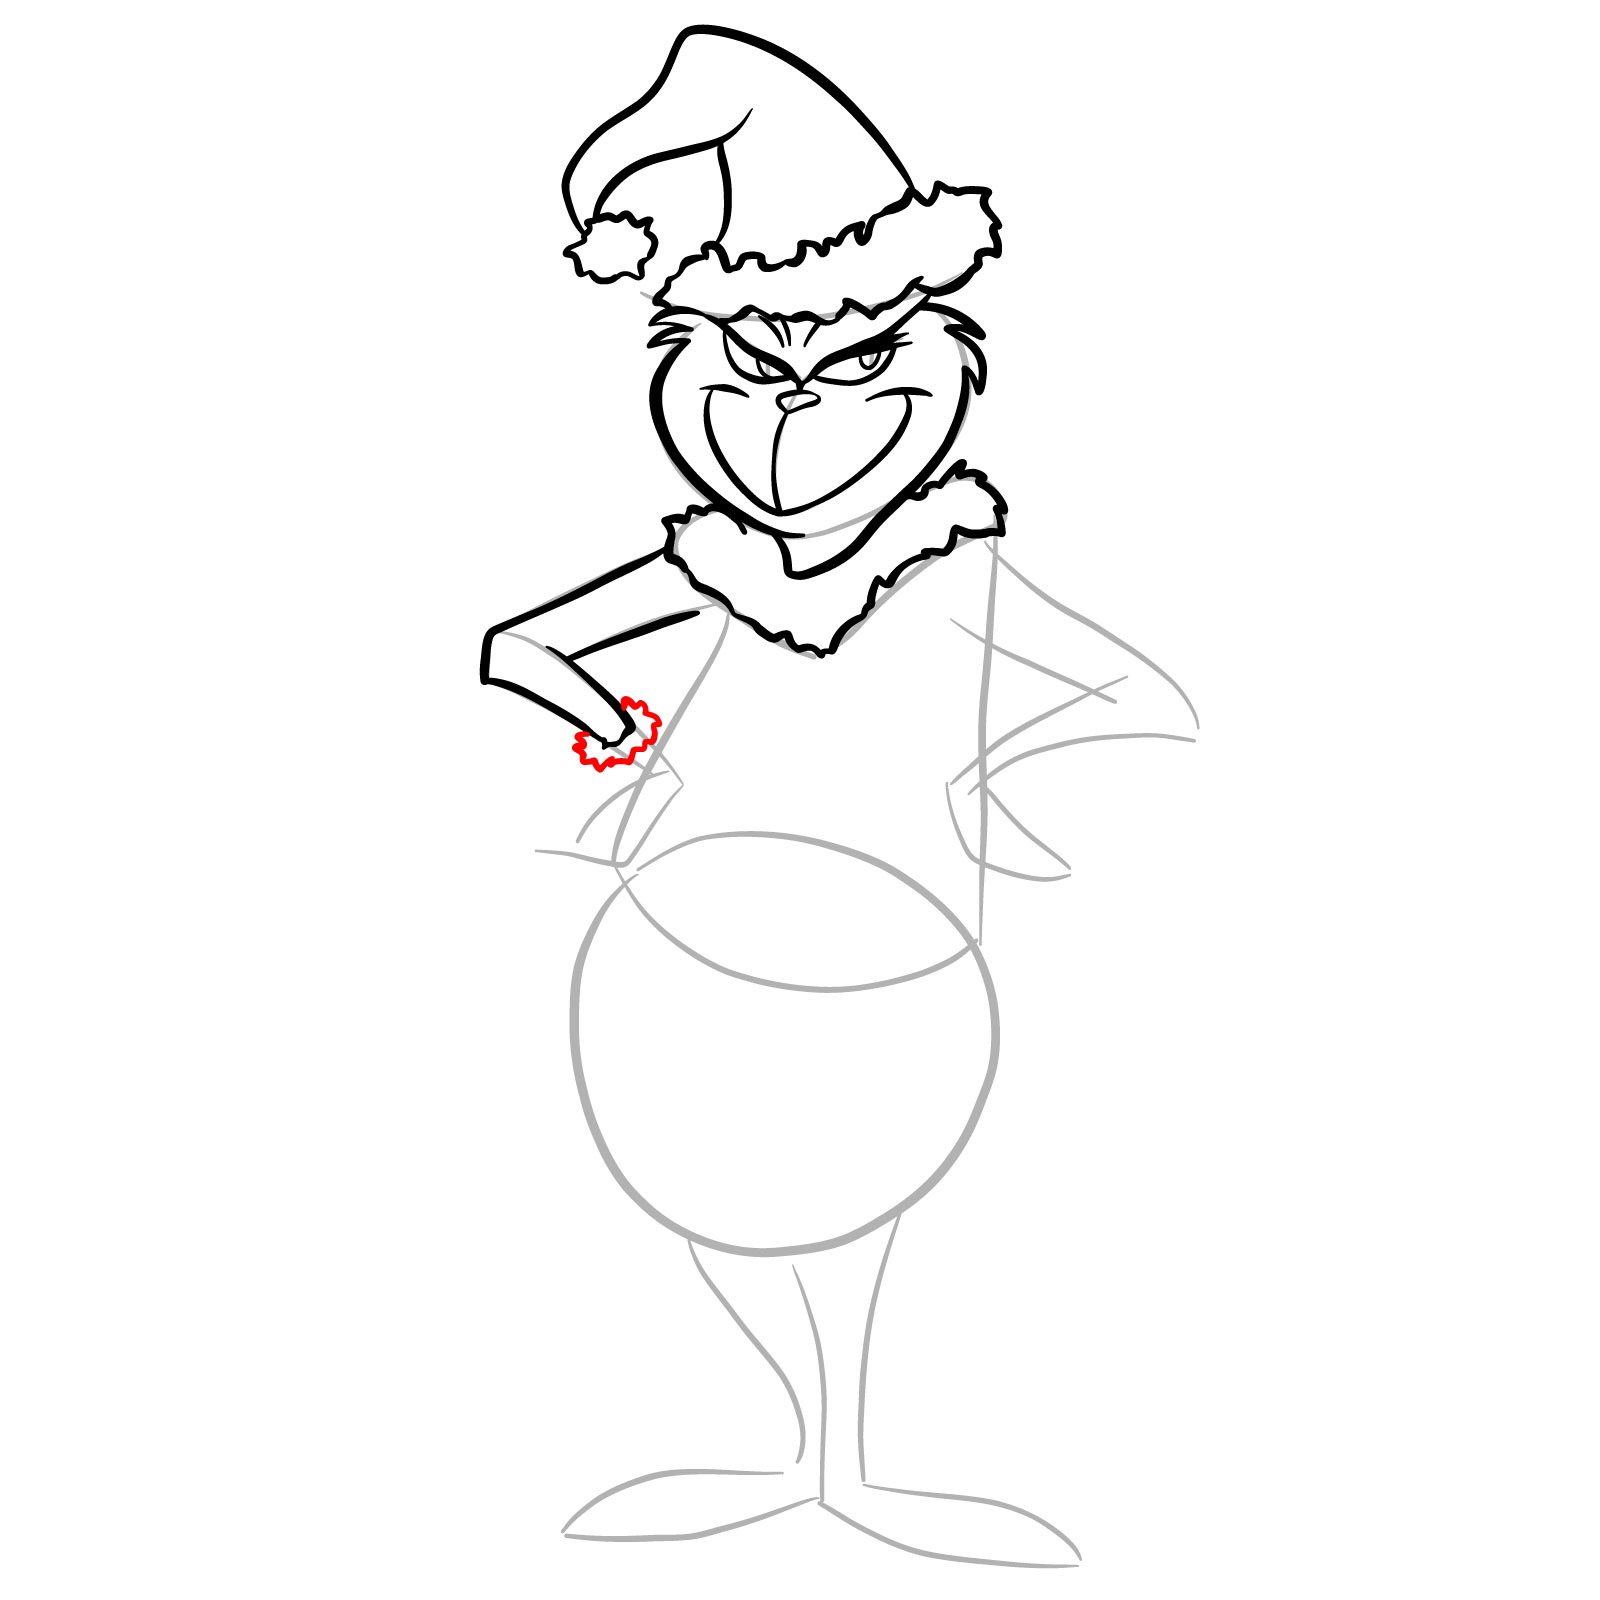 How to draw The Grinch in a Christmas costume - step 14